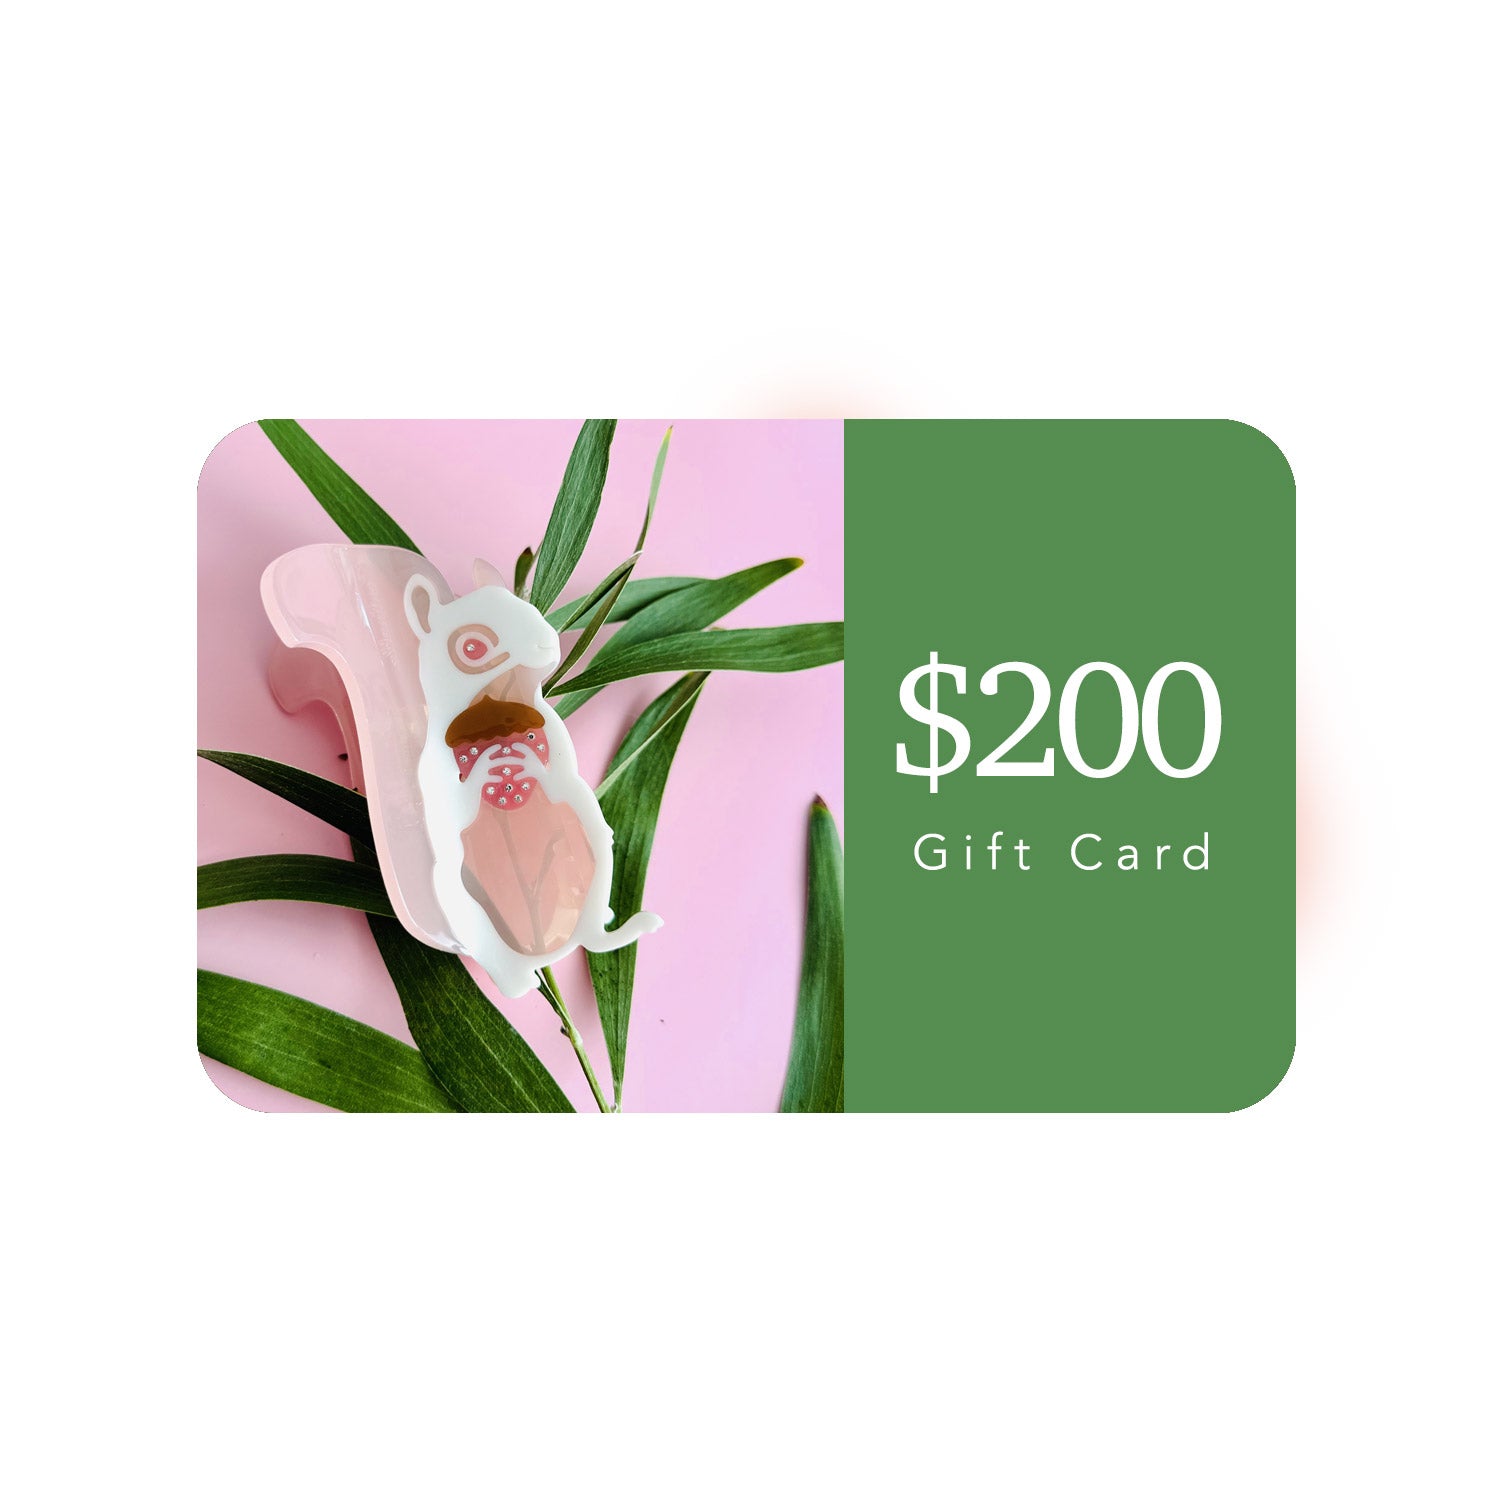 Centinelle gift card with 200 dollars value.